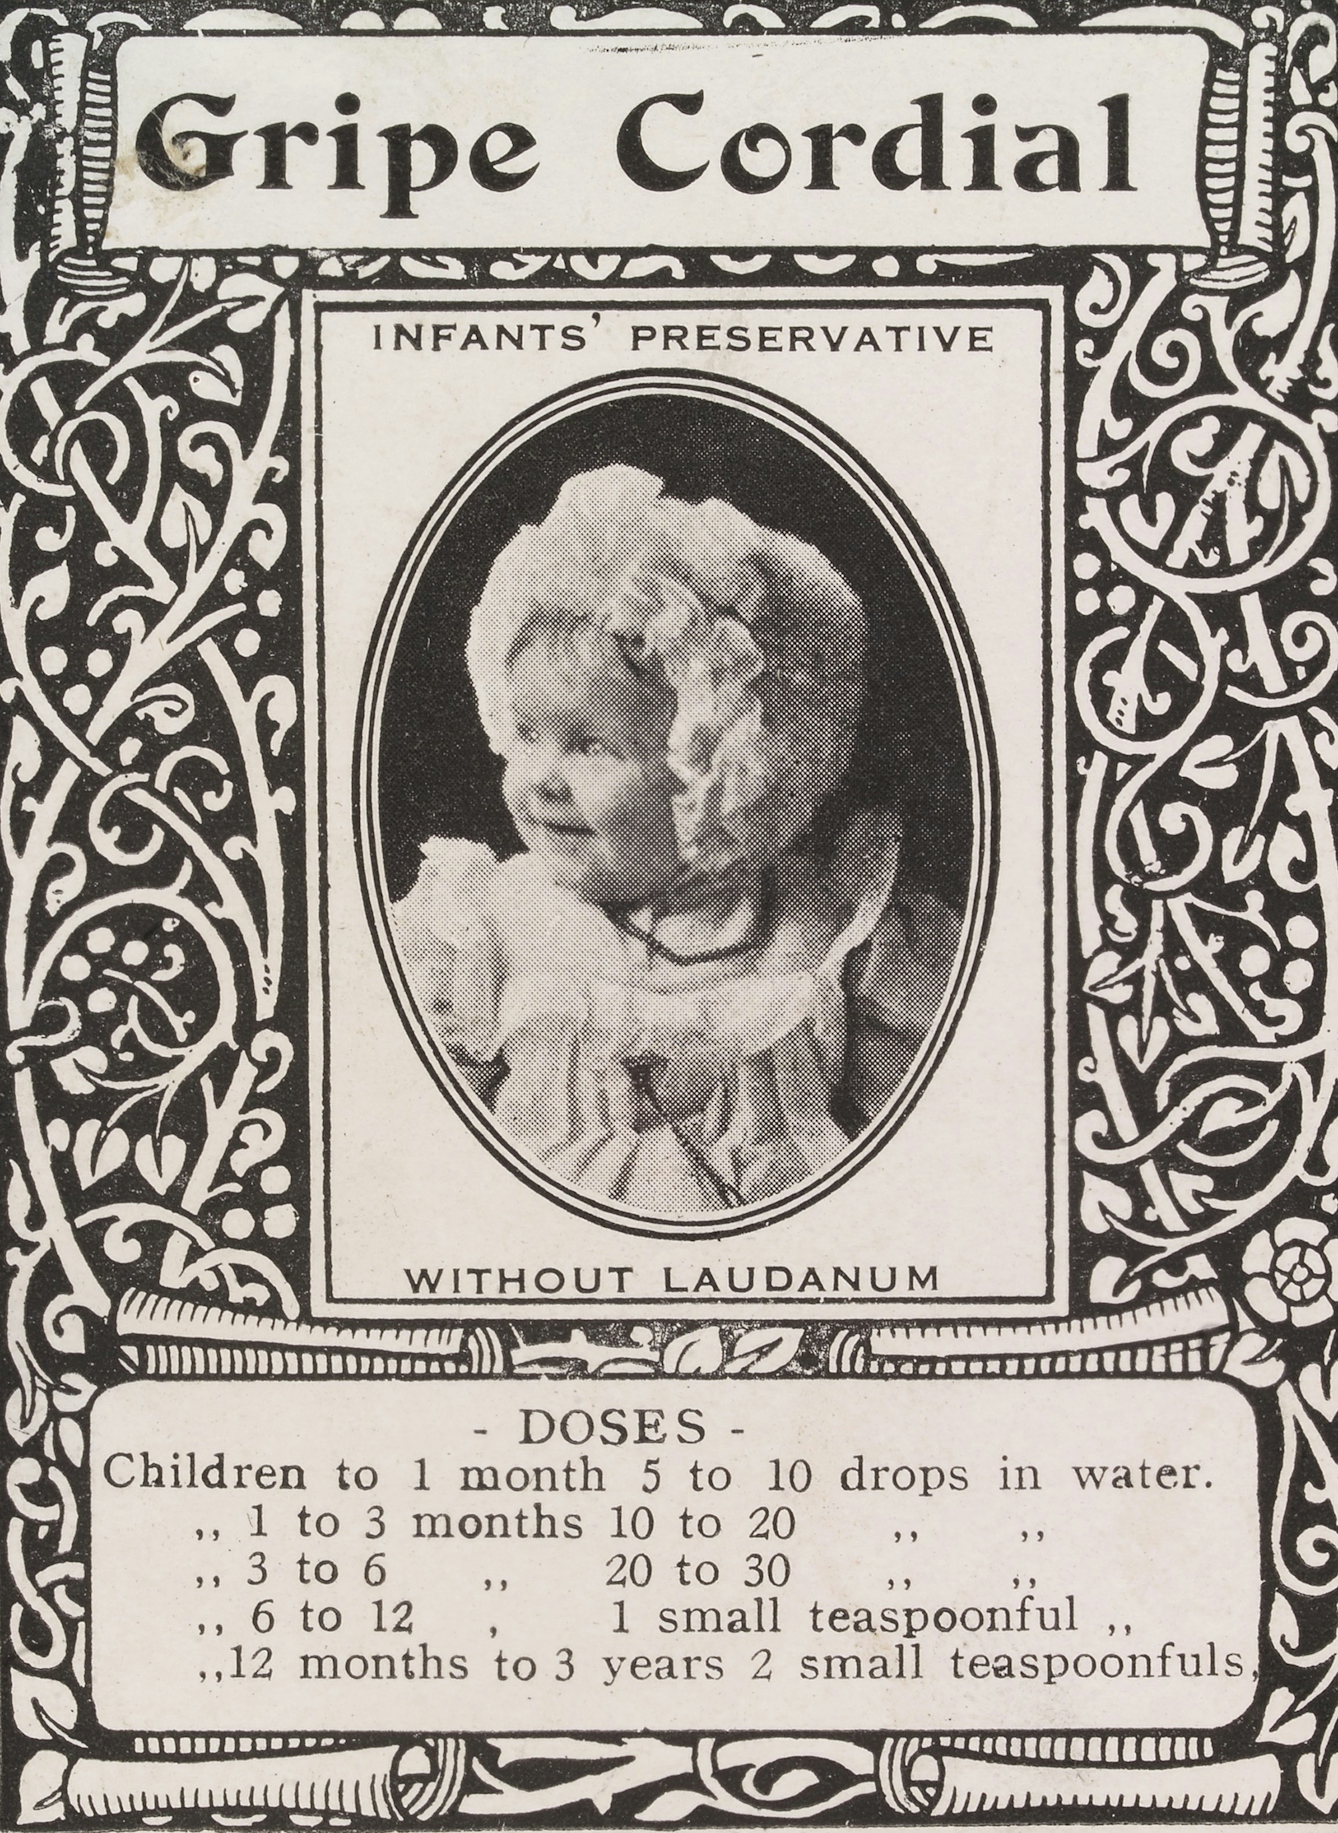 Label for Gripe Cordial featuring a smiling baby